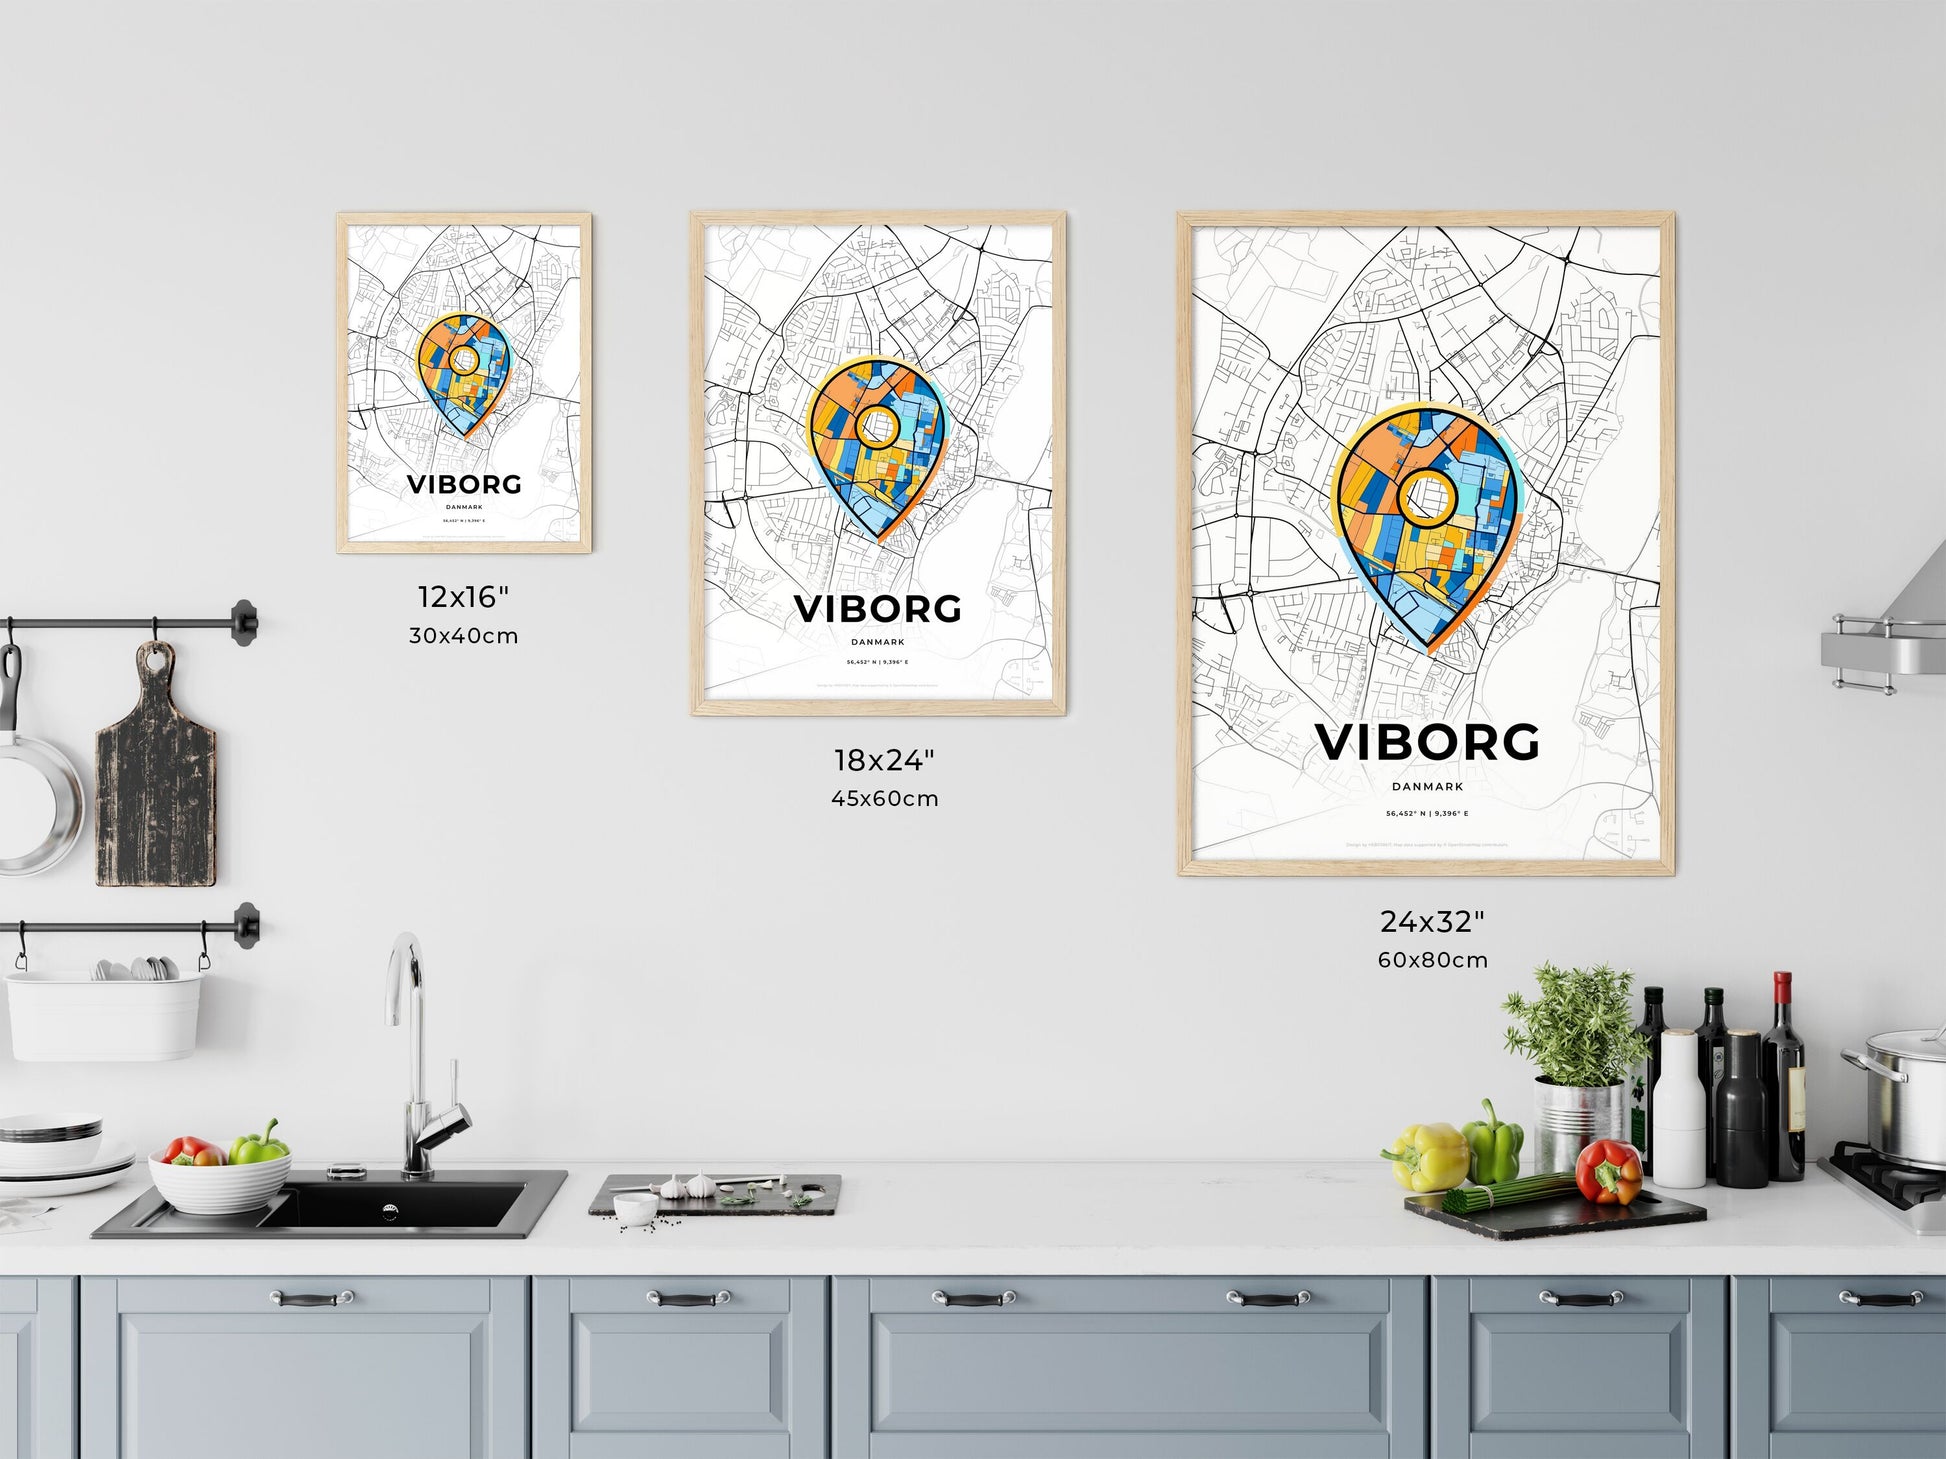 VIBORG DENMARK minimal art map with a colorful icon. Where it all began, Couple map gift.